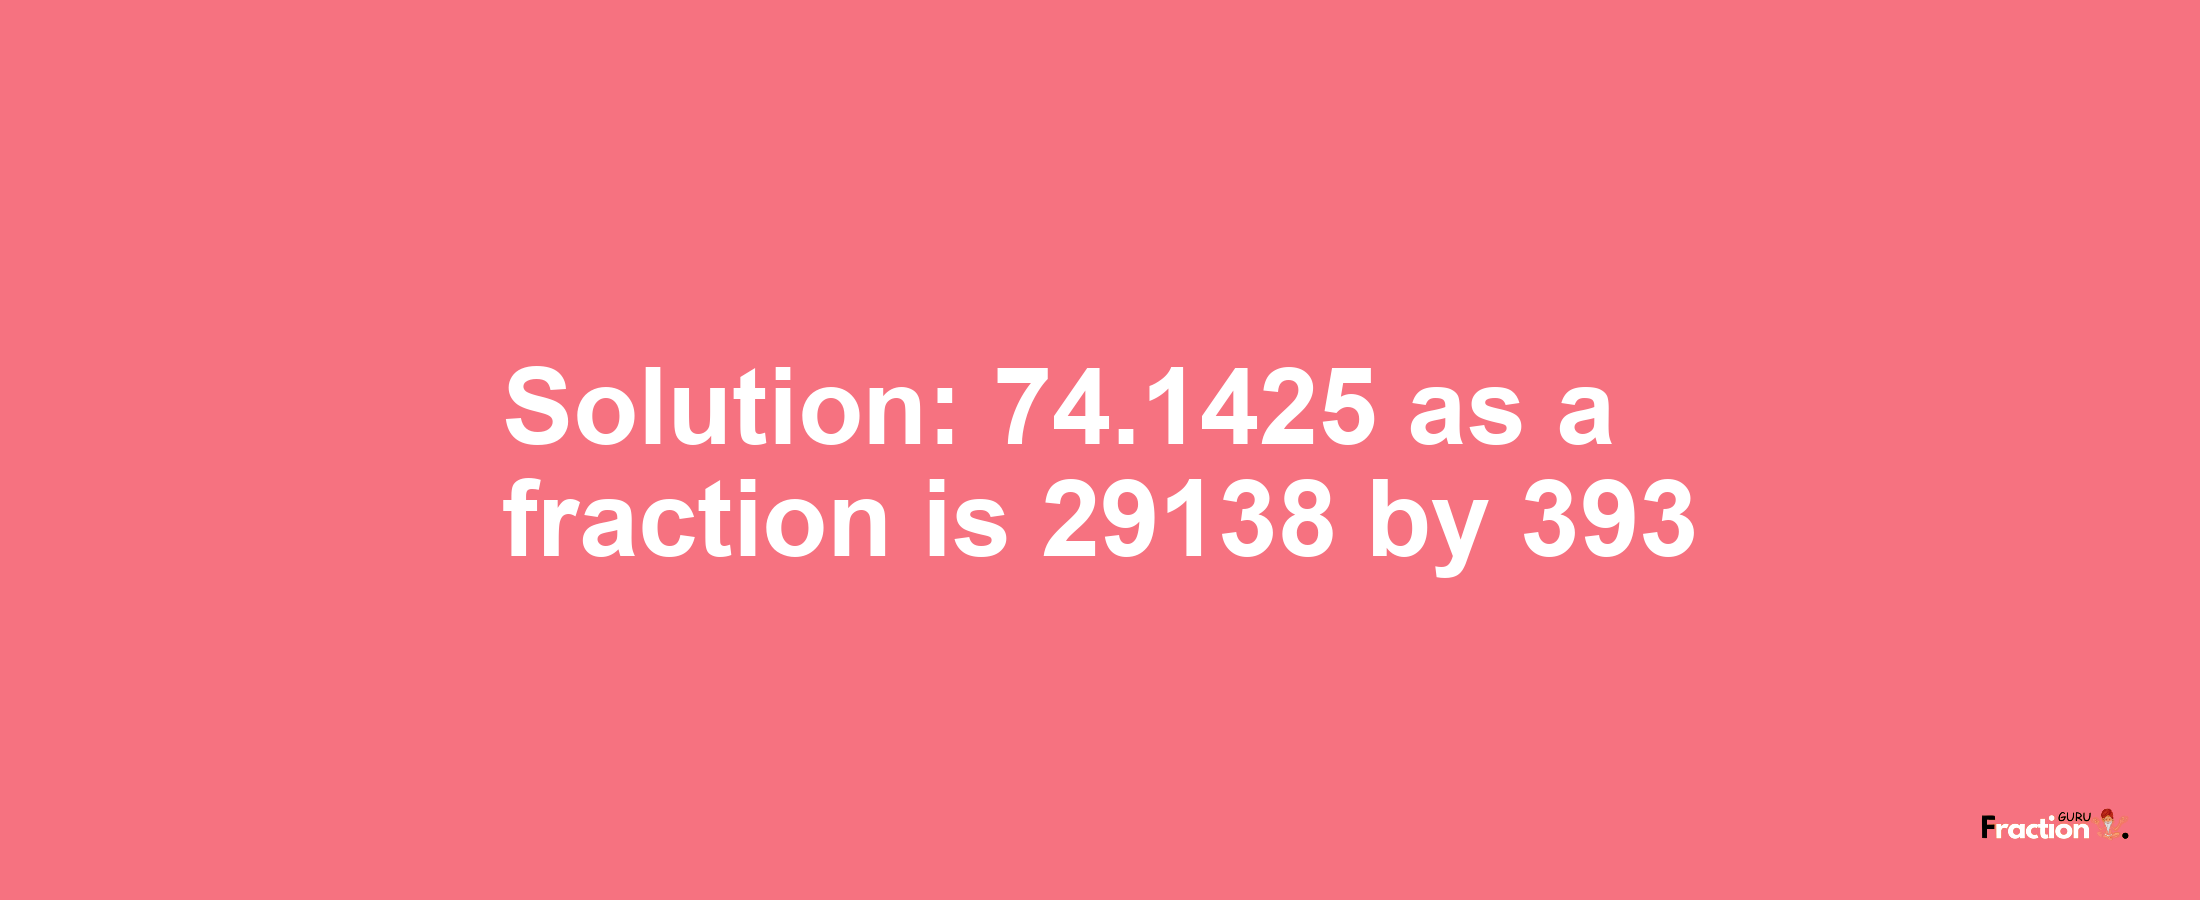 Solution:74.1425 as a fraction is 29138/393